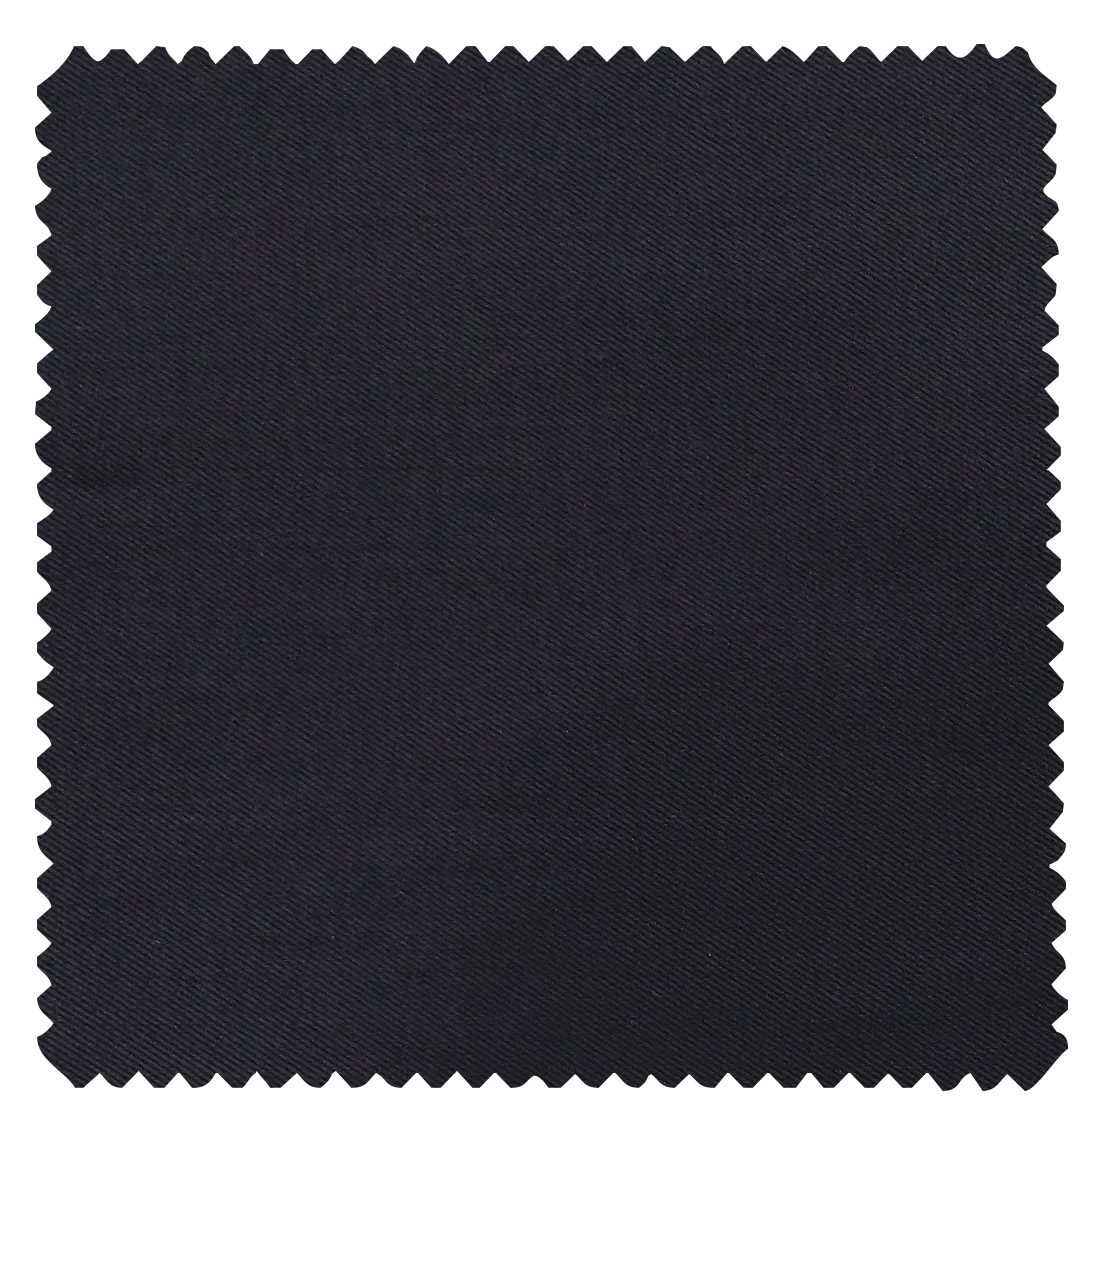 J.Hampstead Italy Men's by Siyaram's Dark Navy Blue Terry Rayon Solid Unstitched Suiting Fabric - 3.75 Meter